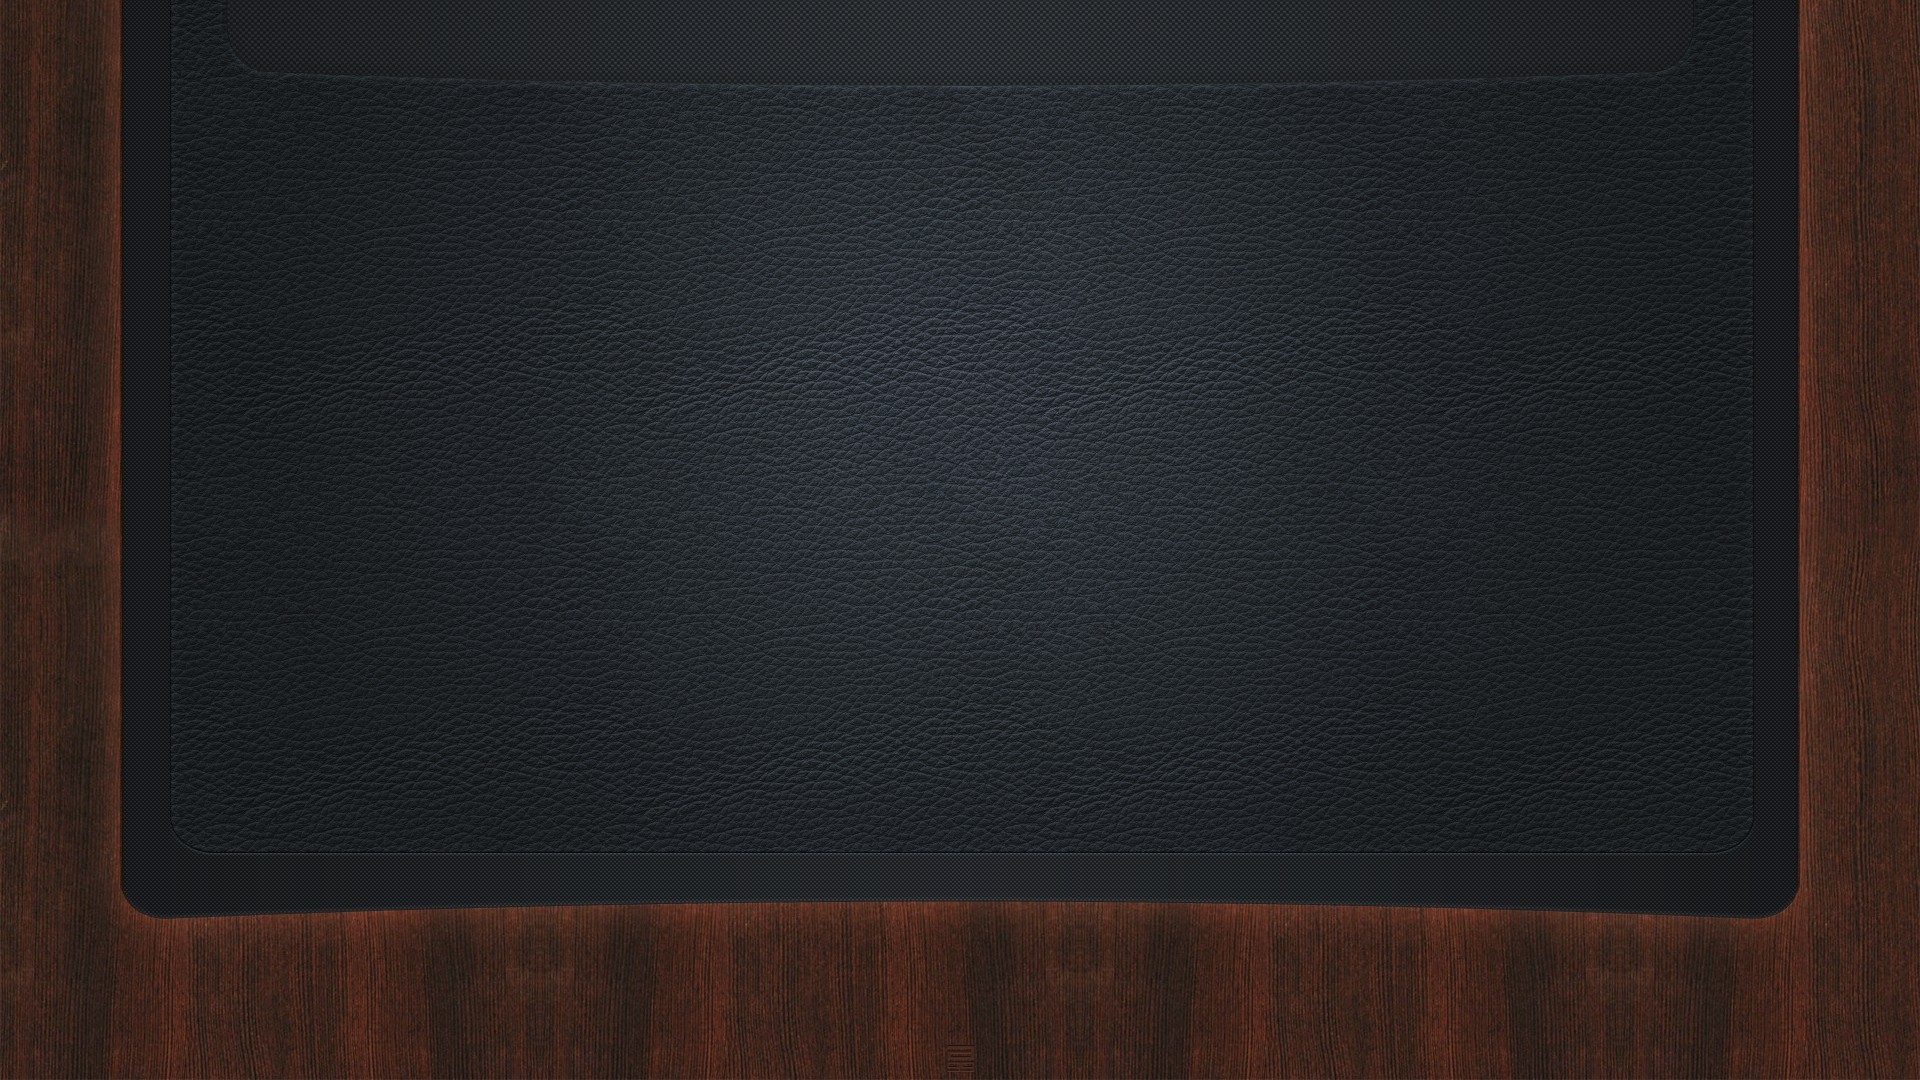 1920x1080 surfaces, leather, wood